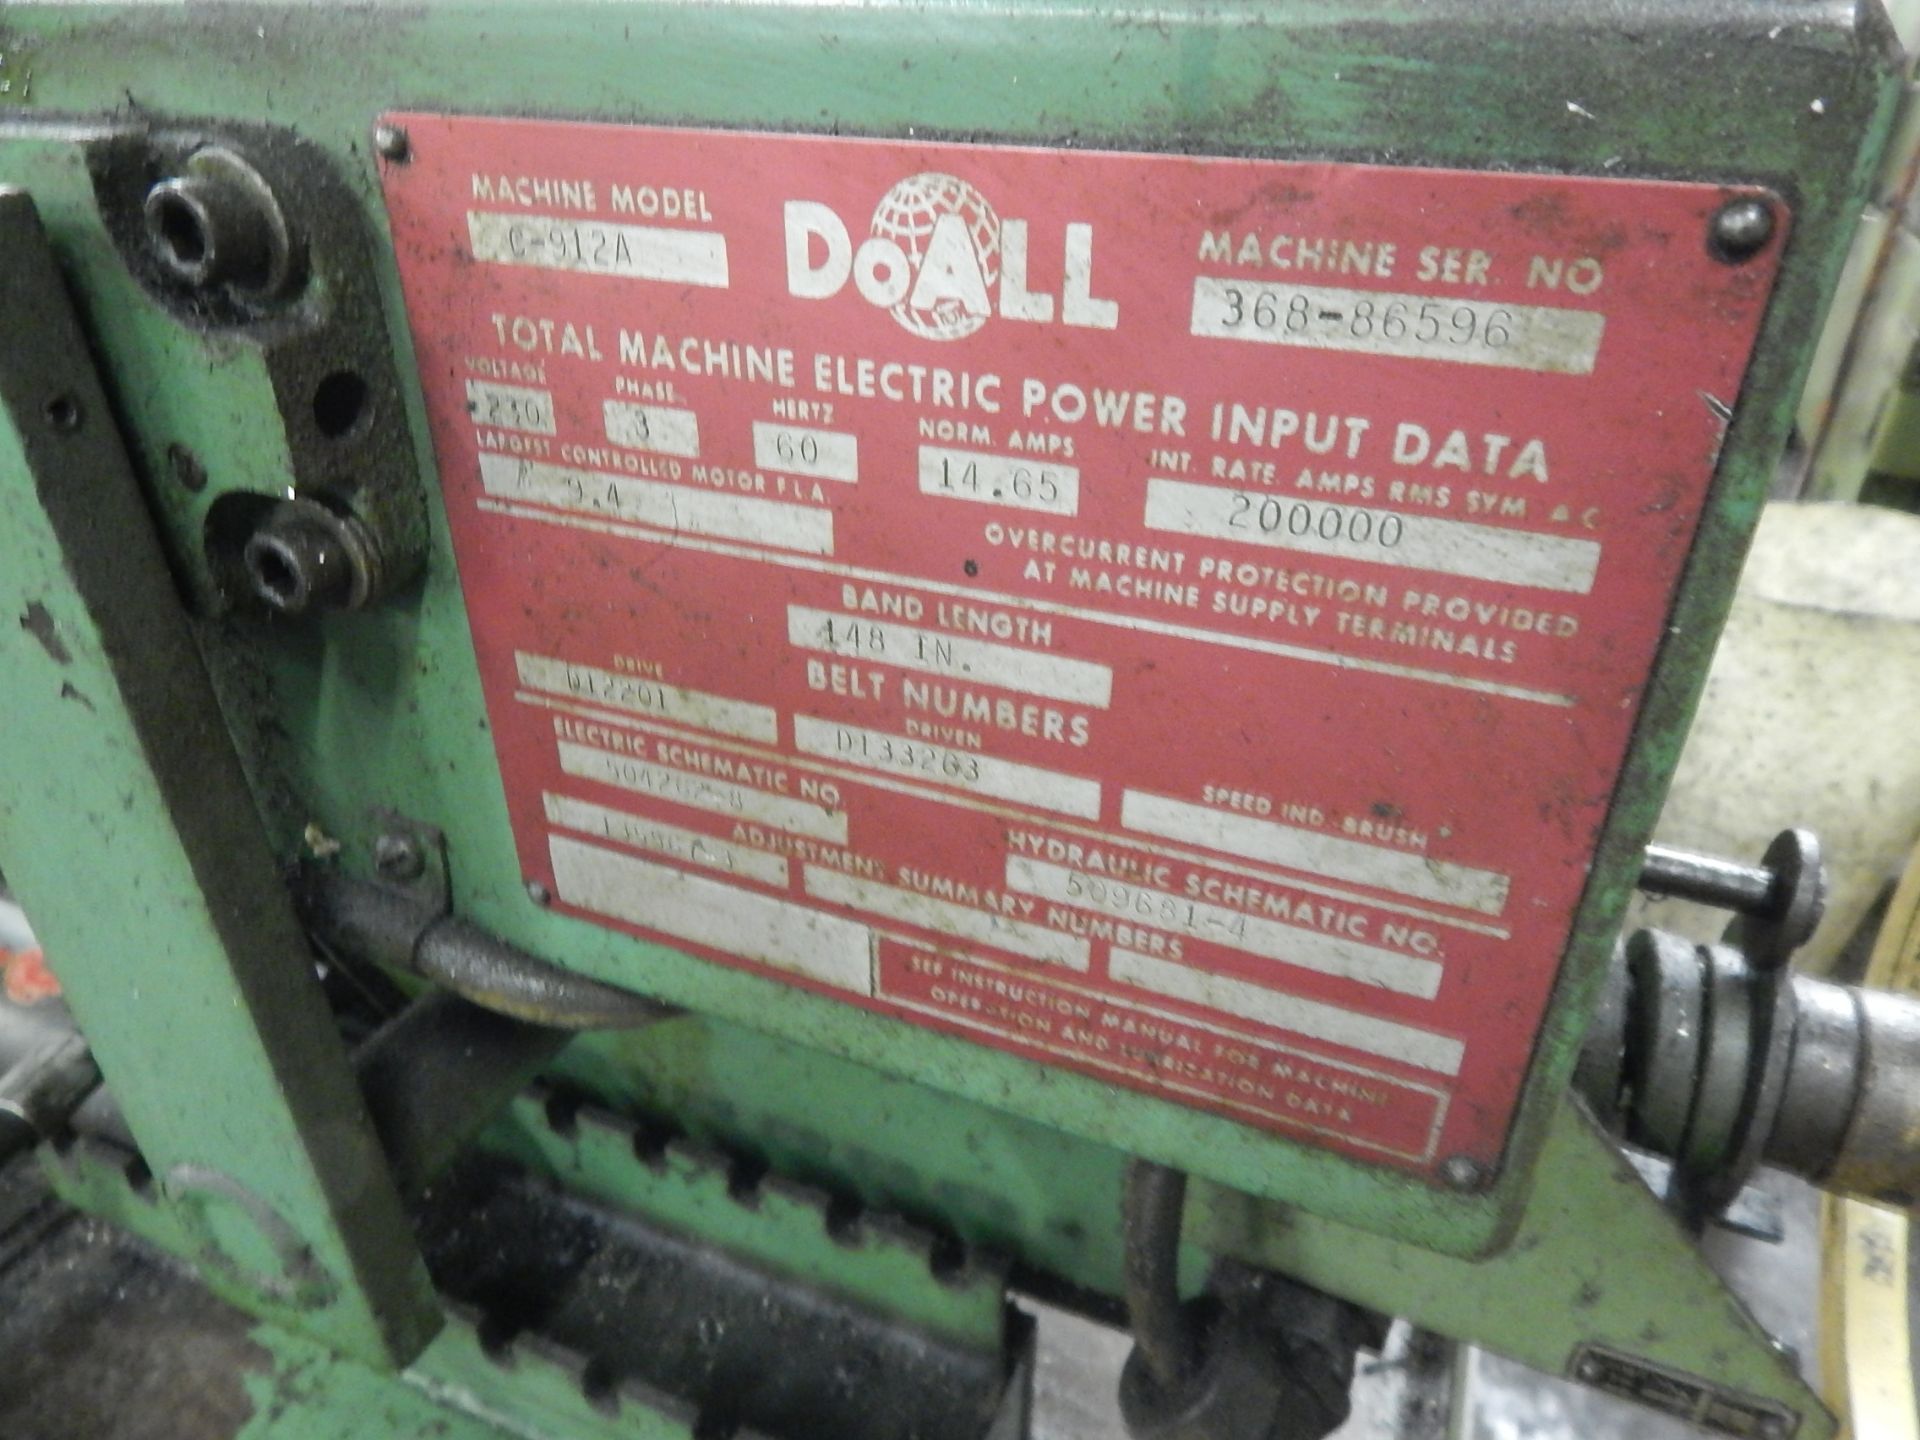 Do-All Model C-912A Auto Horizontal Band Saw, s/n 368-86596, 9” X 12” Rectangular Capacity, 9” Round - Image 5 of 9